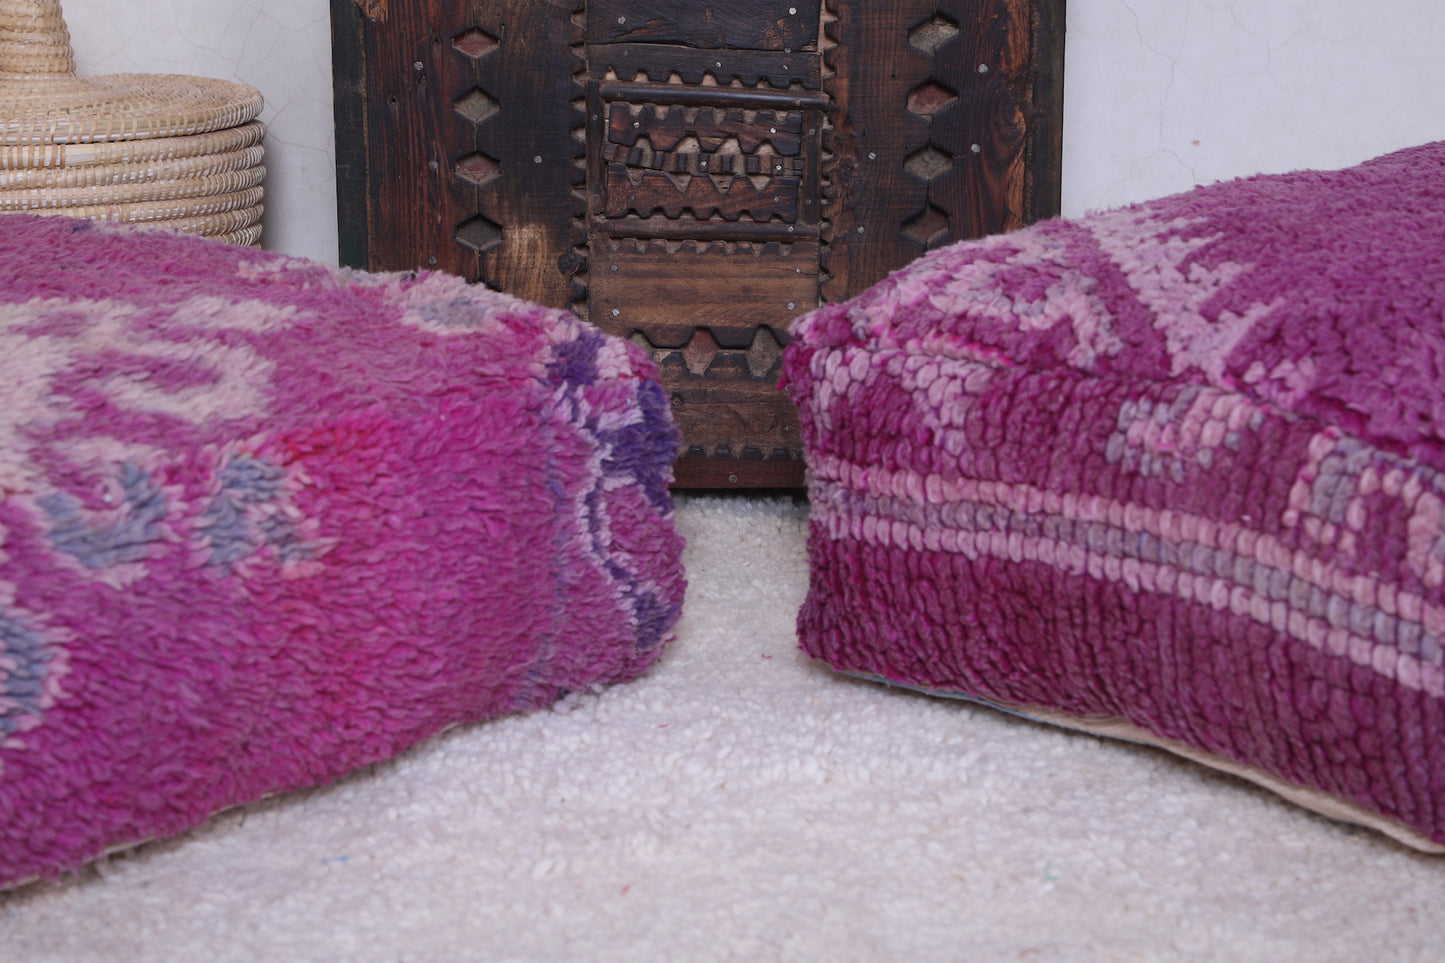 Two handmade berber moroccan violet pouf